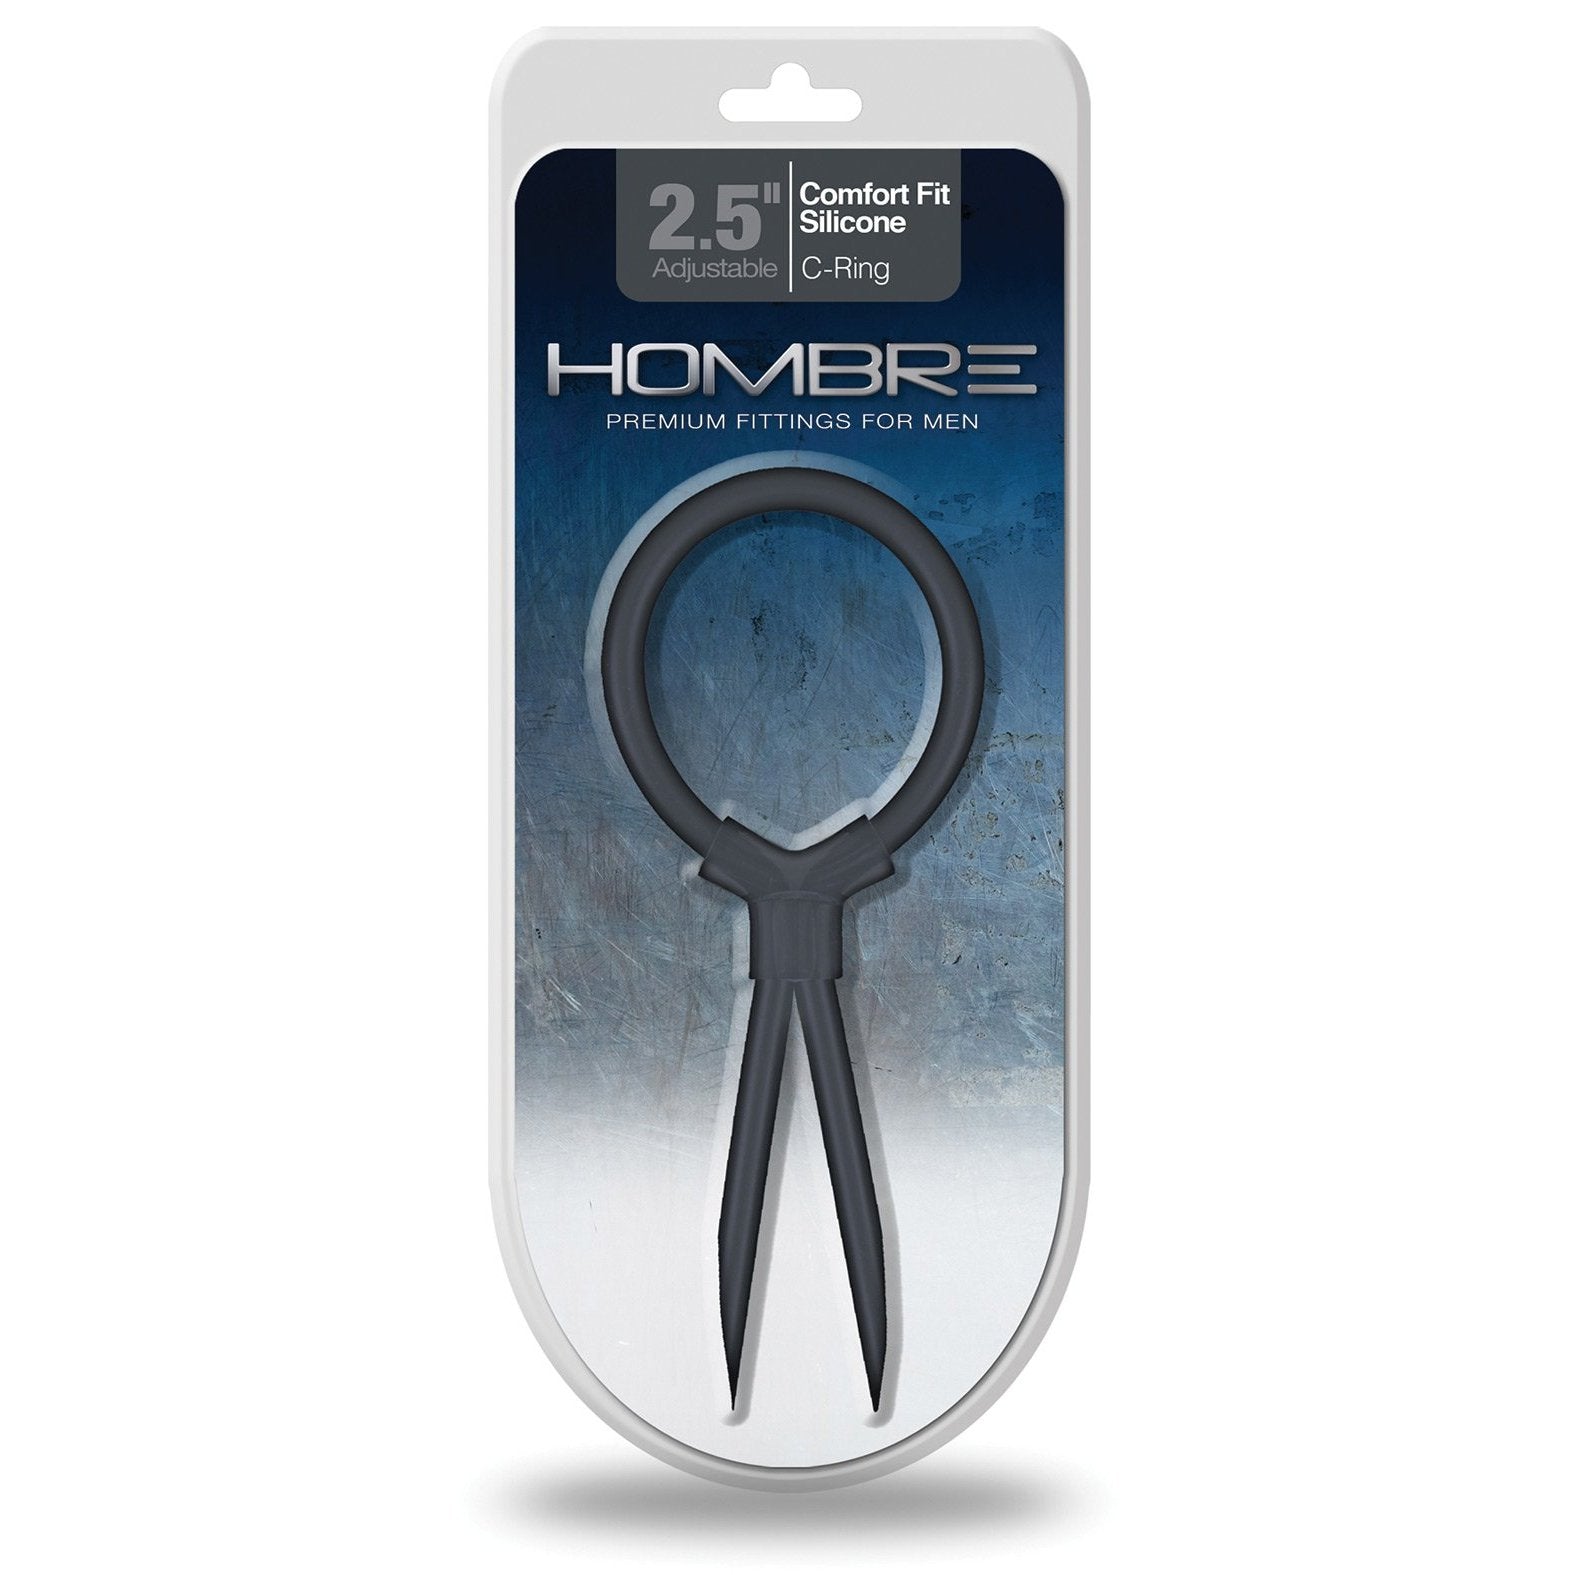 Hombre Comfort Fit Silicone Adjustable C